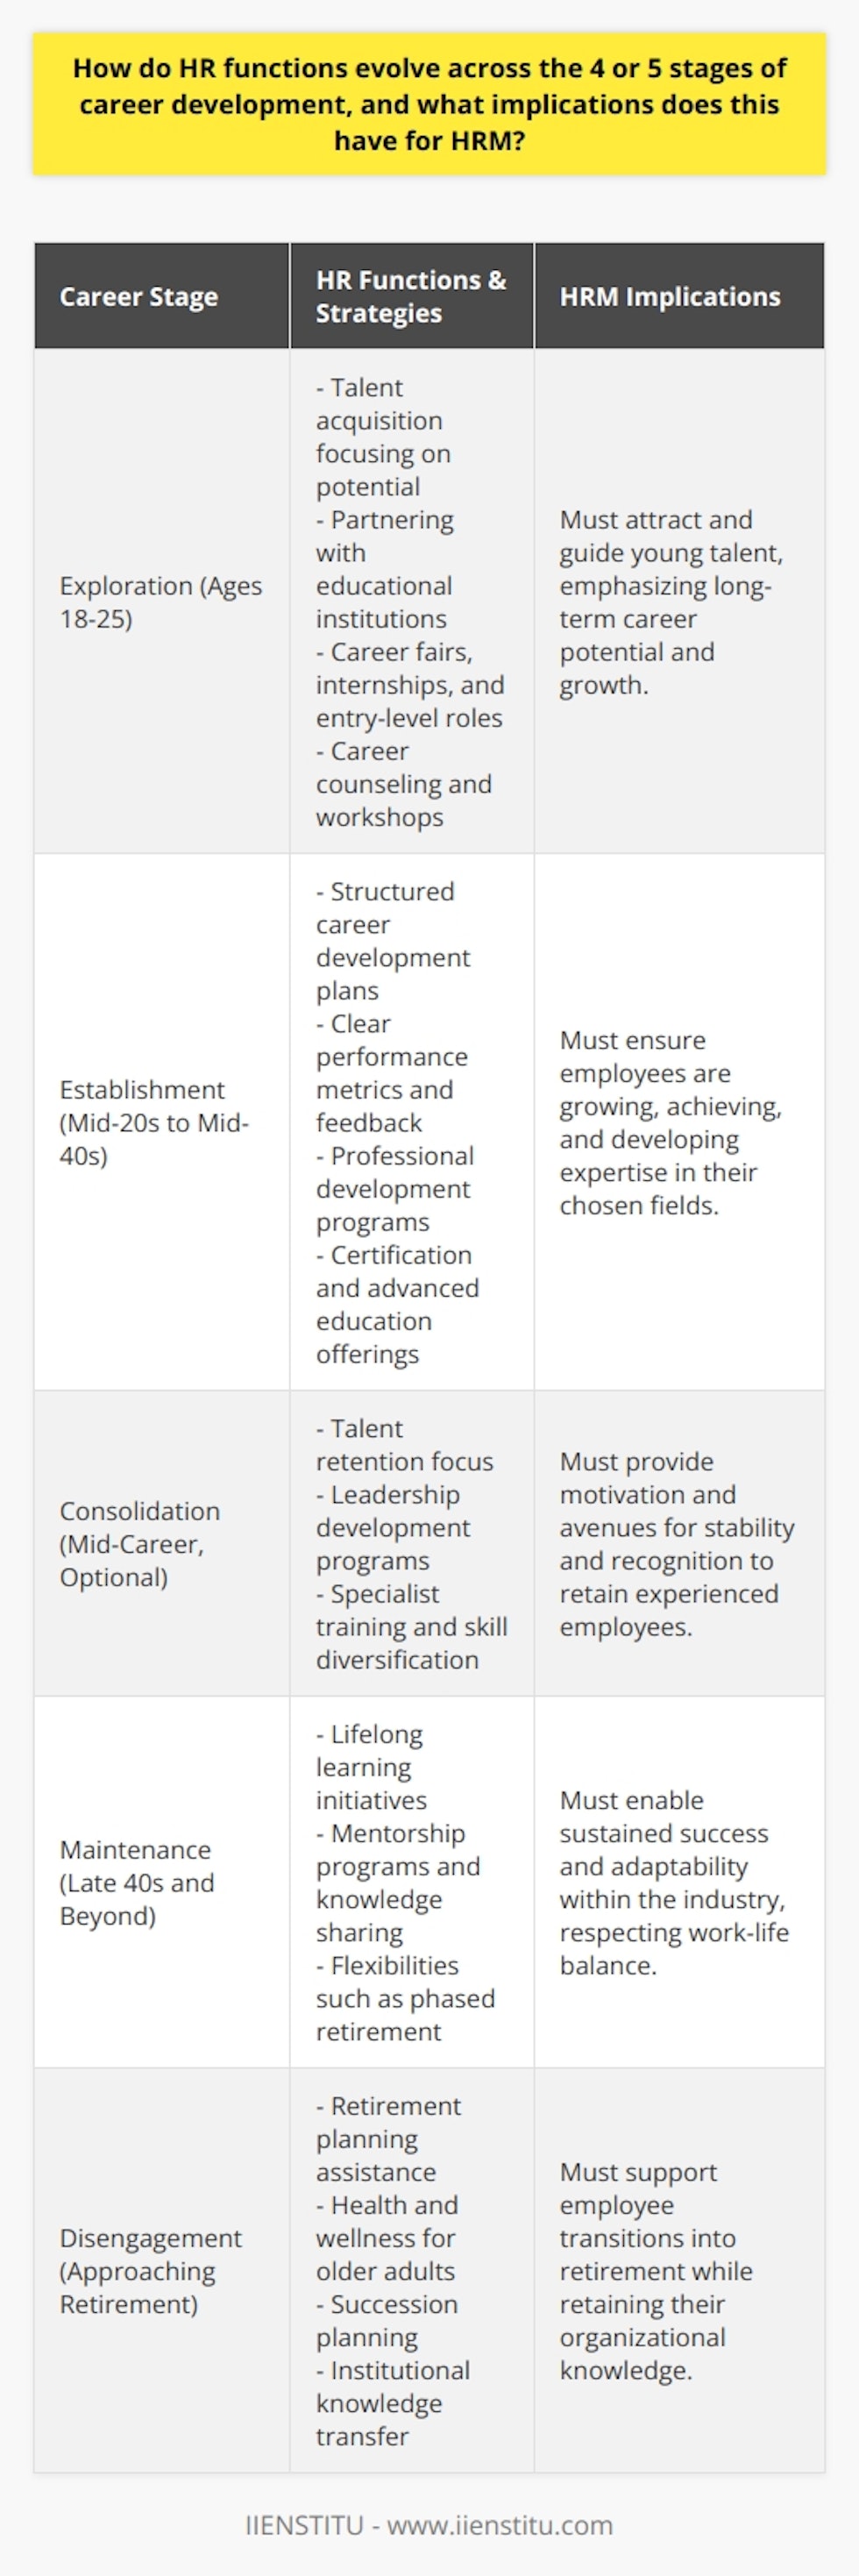 As individuals progress through their careers, HR functions must adapt to address the shifting needs that arise during each stage of career development. Understanding this evolution is vital for effective Human Resource Management (HRM) and contributes greatly to the success of an organization. Here’s how HR functions evolve across the commonly recognized stages of career development:Exploration StageAt this early stage, typically involving young adults between the ages of 18 and 25, the role of HR is to inspire new participants in the workforce. HRM should invest in talent acquisition strategies that focus on potential rather than just experience. This stage sees an emphasis on career fairs, collaborations with educational institutions like universities, and interactive platforms like IIENSTITU, which offers training and development opportunities. Career counselling and workshops can aid individuals in identifying their interests and aptitudes, ensuring they embark on a path that aligns with their skills and aspirations. Furthermore, Internships and entry-level positions are vital offerings, providing a glimpse of the professional world and helping individuals make informed career choices.Establishment StageOnce an individual has chosen a professional direction, usually in their mid-20s to mid-40s, they enter the establishment stage. During this period, the HR function centers around growth and achievement. Creating structured career development plans, identifying clear performance metrics, and providing continuous feedback are key roles for HRM. This stage should see a significant investment in professional development programs, including in-house training, conferences, certification programs, and advanced education opportunities. The focus is to help employees build expertise and gain the confidence necessary to thrive in their chosen fields.Consolidation Stage (Optional)Some models include a consolidation stage, often experienced in the mid-career phase, where individuals seek stability and recognition in their roles. At this juncture, HR’s focus shifts to talent retention and ensuring that experienced employees remain motivated and engaged. Offering leadership development programs, specialist training aligned with employees' long-term career goals, and opportunities for skill diversification all play into this effort.Maintenance StageBy the time individuals reach their late 40s and beyond, they often aim to sustain the success they’ve achieved and work at peak productivity. HRM’s role at this stage involves facilitating employees' ability to keep pace with evolving industry trends and shifts in technology. Lifelong learning initiatives, mentorship programs, and knowledge sharing forums can be effective. At the same time, HR practices should also account for the desire for work-life balance and providing flexibilities such as phased retirement options or part-time tracks.Disengagement StageIn the final stage of a career, typically marked by preparing for and entering retirement, the HR function evolves to support transition. Activities might include retirement planning workshops, health and wellness seminars geared towards older adults, and succession planning. Additionally, HRM must focus on capturing and transferring the valuable institutional knowledge that these employees possess through mentorship programs or consultant roles that keep them engaged with the organization post-retirement.Implications for HRMThe progression of HR functions throughout the career life cycle requires HRM to be flexible and adaptive. It implies designing HR strategies that are responsive to the evolving expectations and needs of employees at each career stage. Failing to address these changing needs can result in decreased employee engagement, higher turnover rates, and a less competitive organization. Therefore, HR professionals must possess a deep understanding of career development stages to provide appropriate benefits, career guidance, professional growth opportunities, and transition support. Successful HRM strategies engender a workforce that feels valued and equipped to contribute to the organization's objectives, regardless of their career stage.